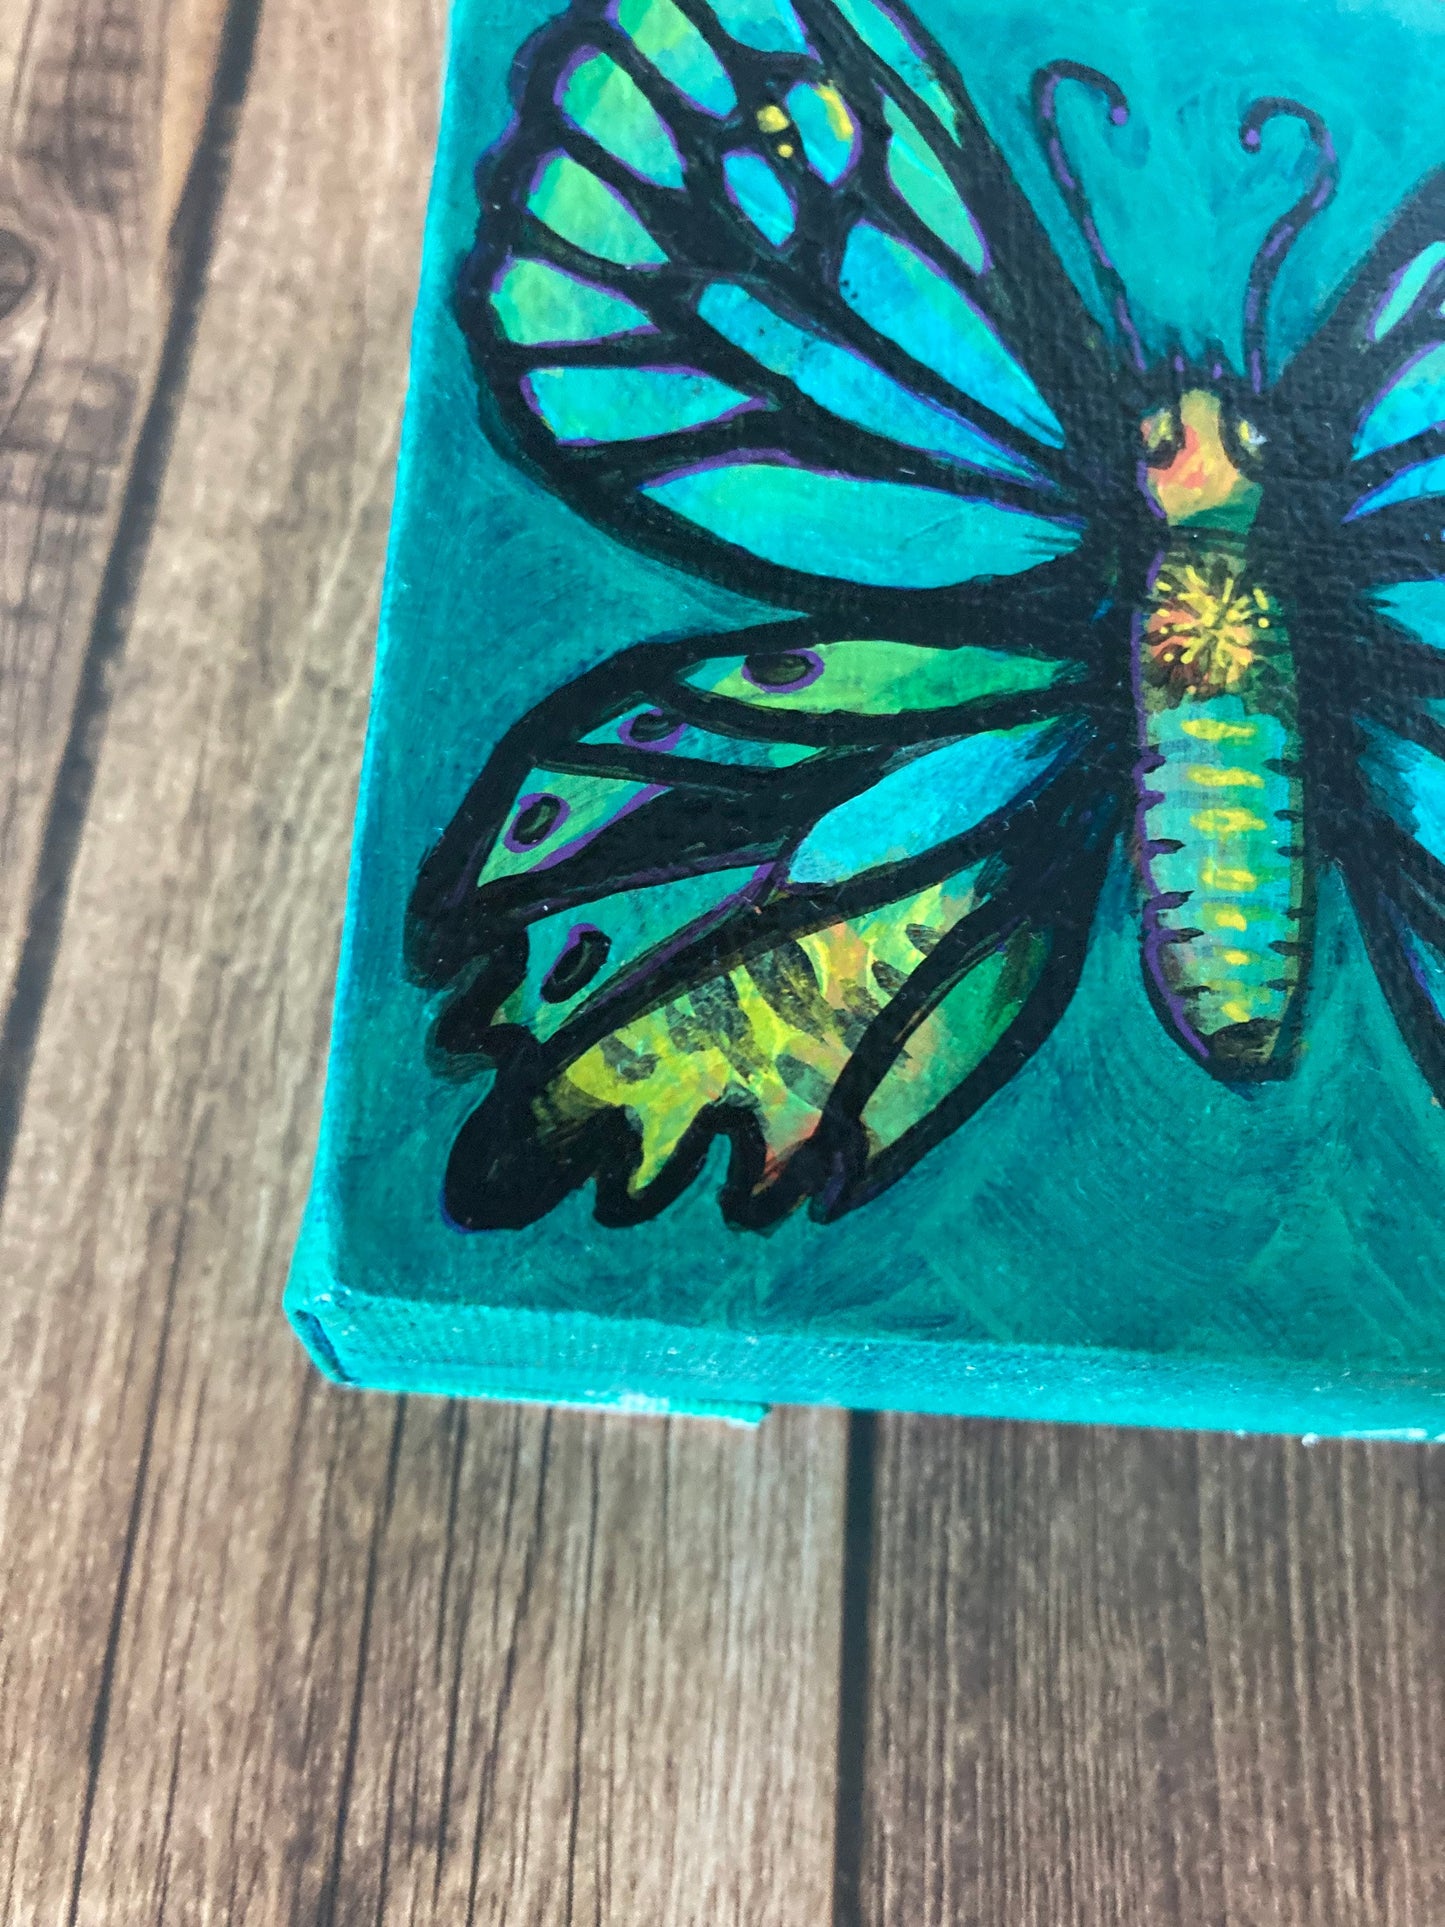 PAINTING- Butterfly on Teal 4"/10cm square mini original painting of a butterfly on a teal background, by Adriana Bergstrom